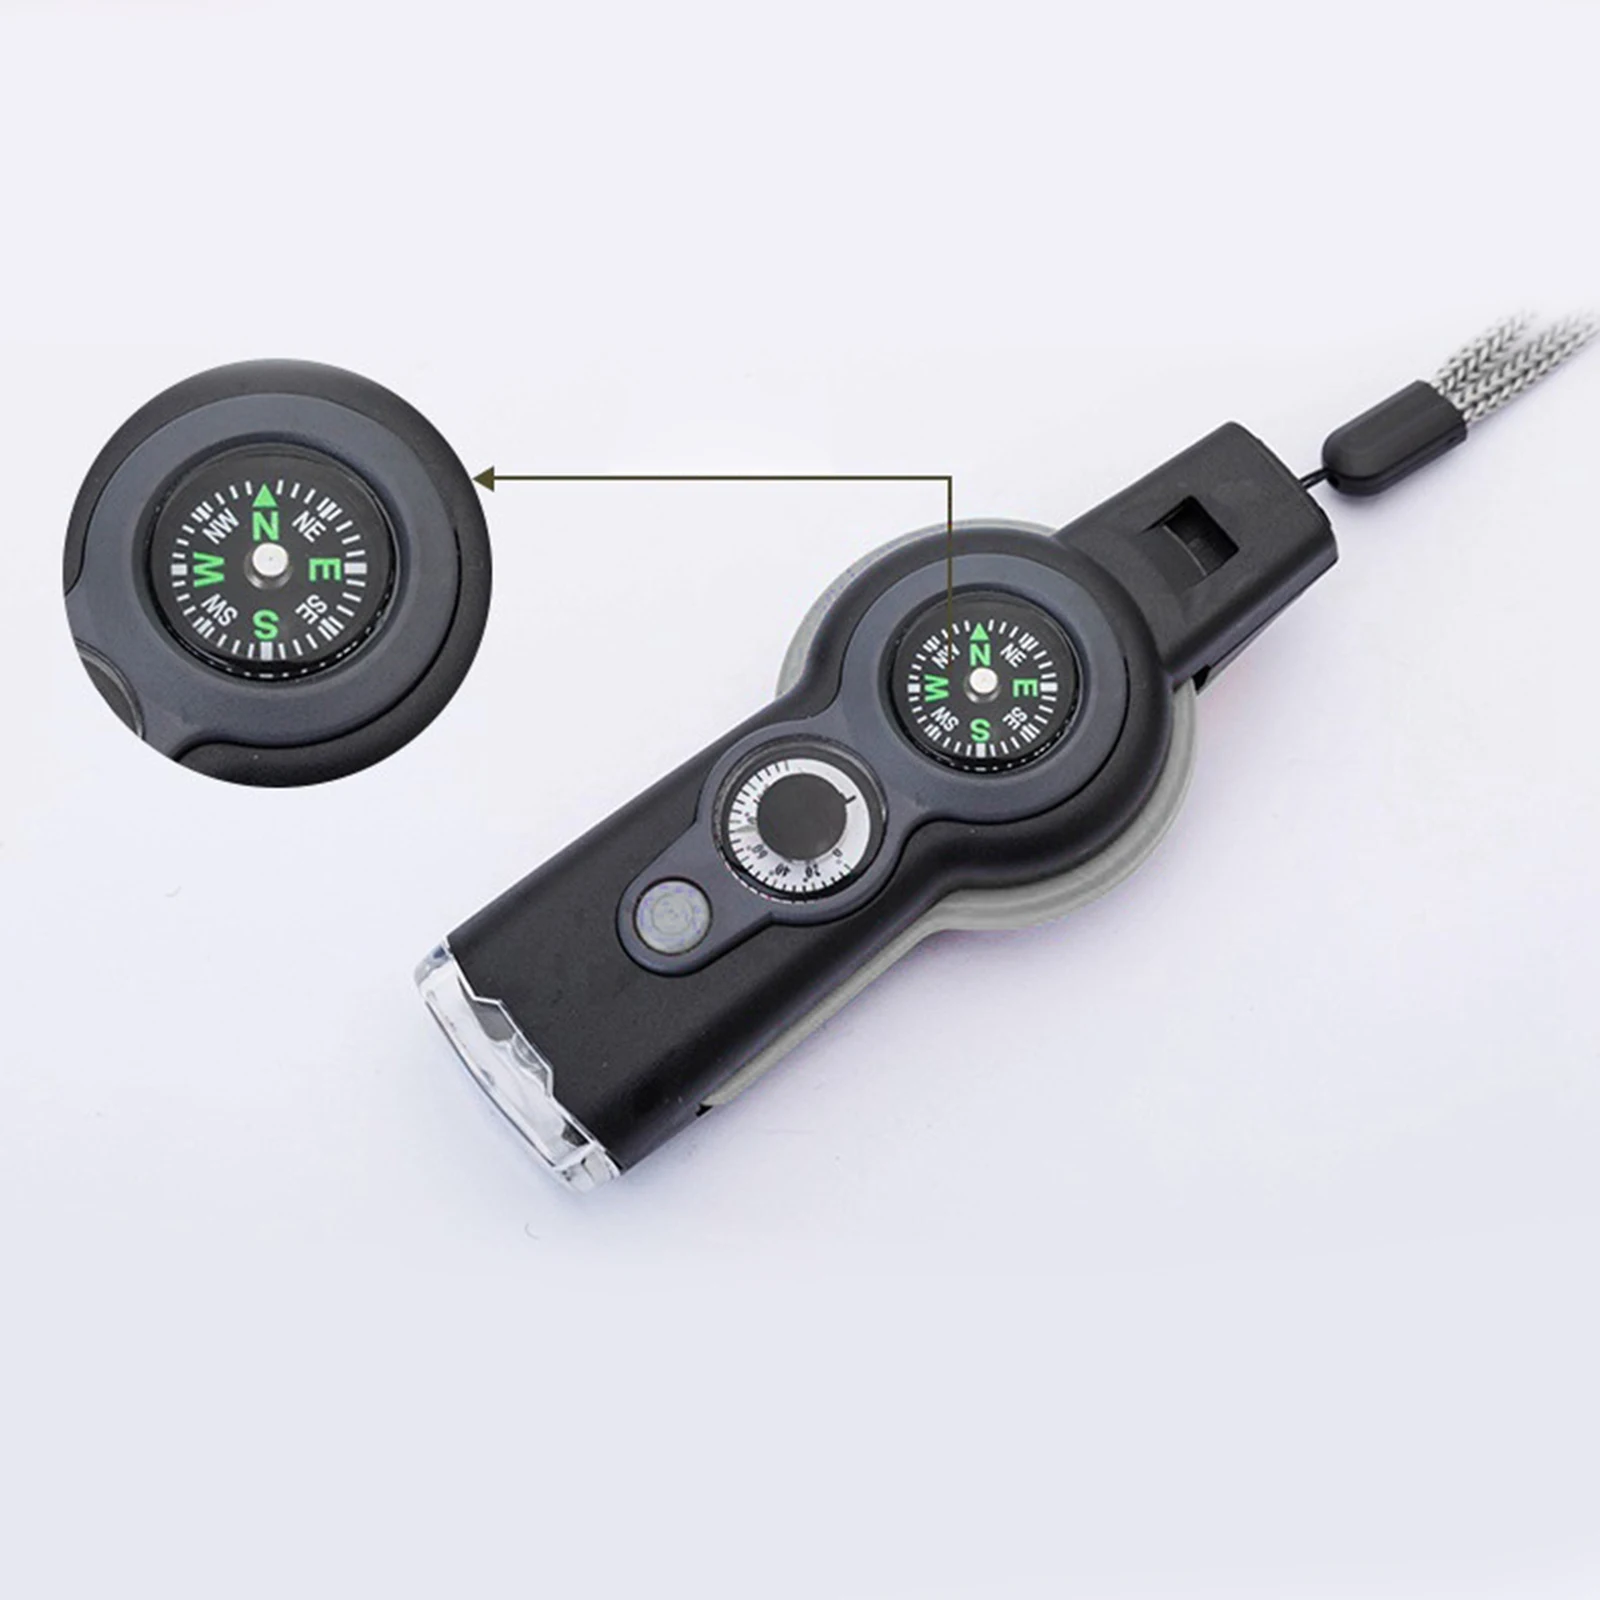 7 in 1 Military Survival Whistle Multi-function Emergency Life Saving Tool Camping Hiking Accessory flashlight Compass